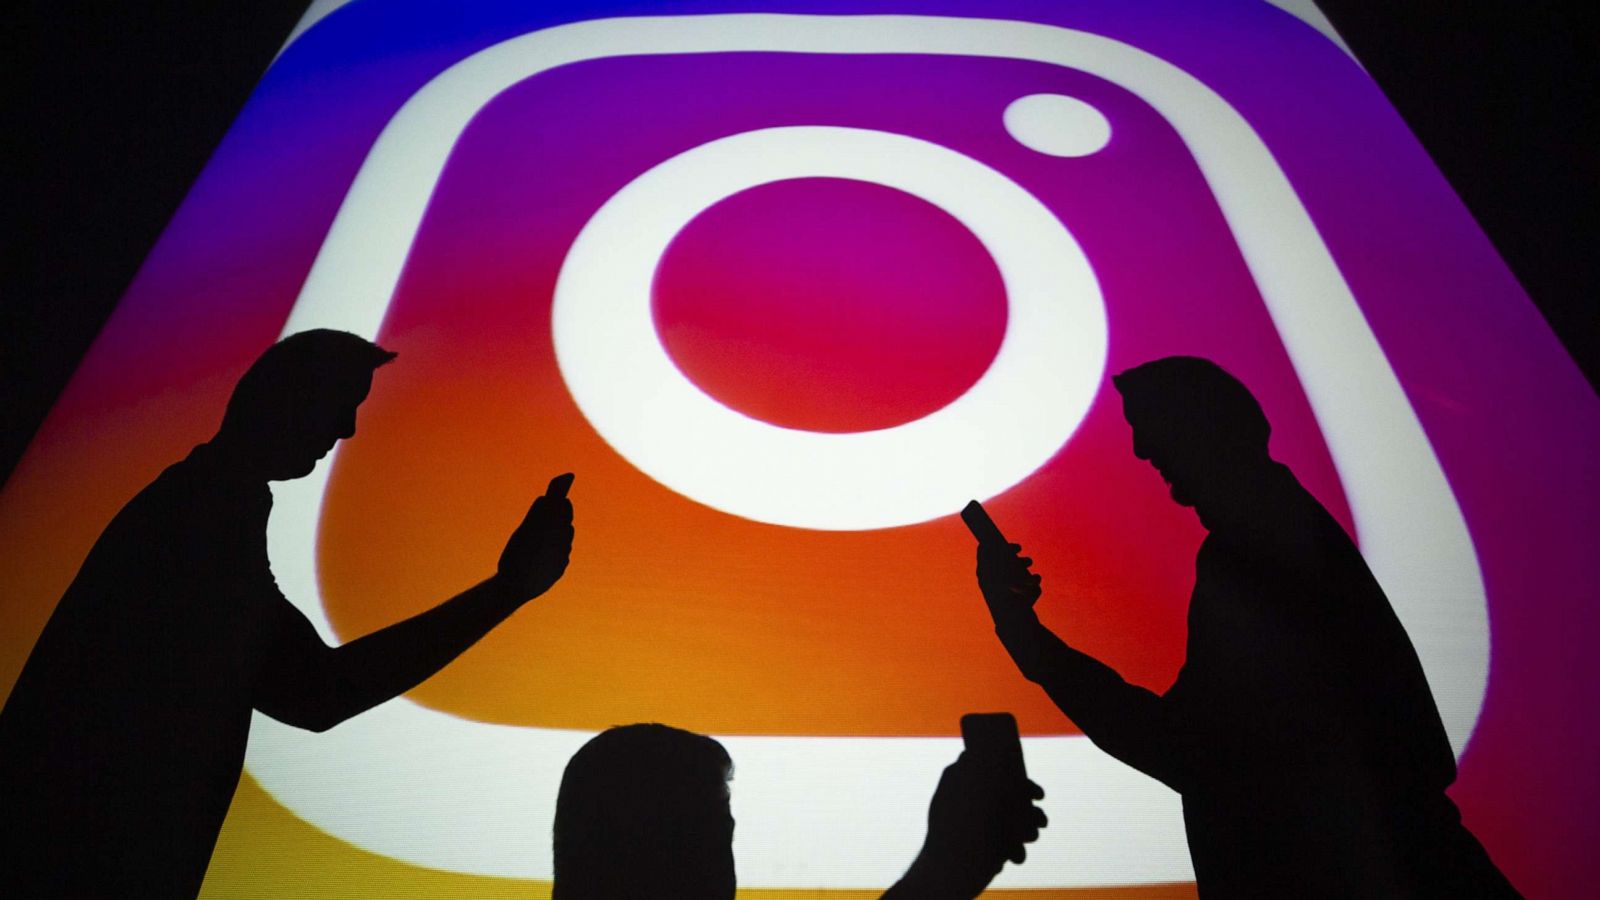 People buy likes on Instagram to become societal post thumbnail image